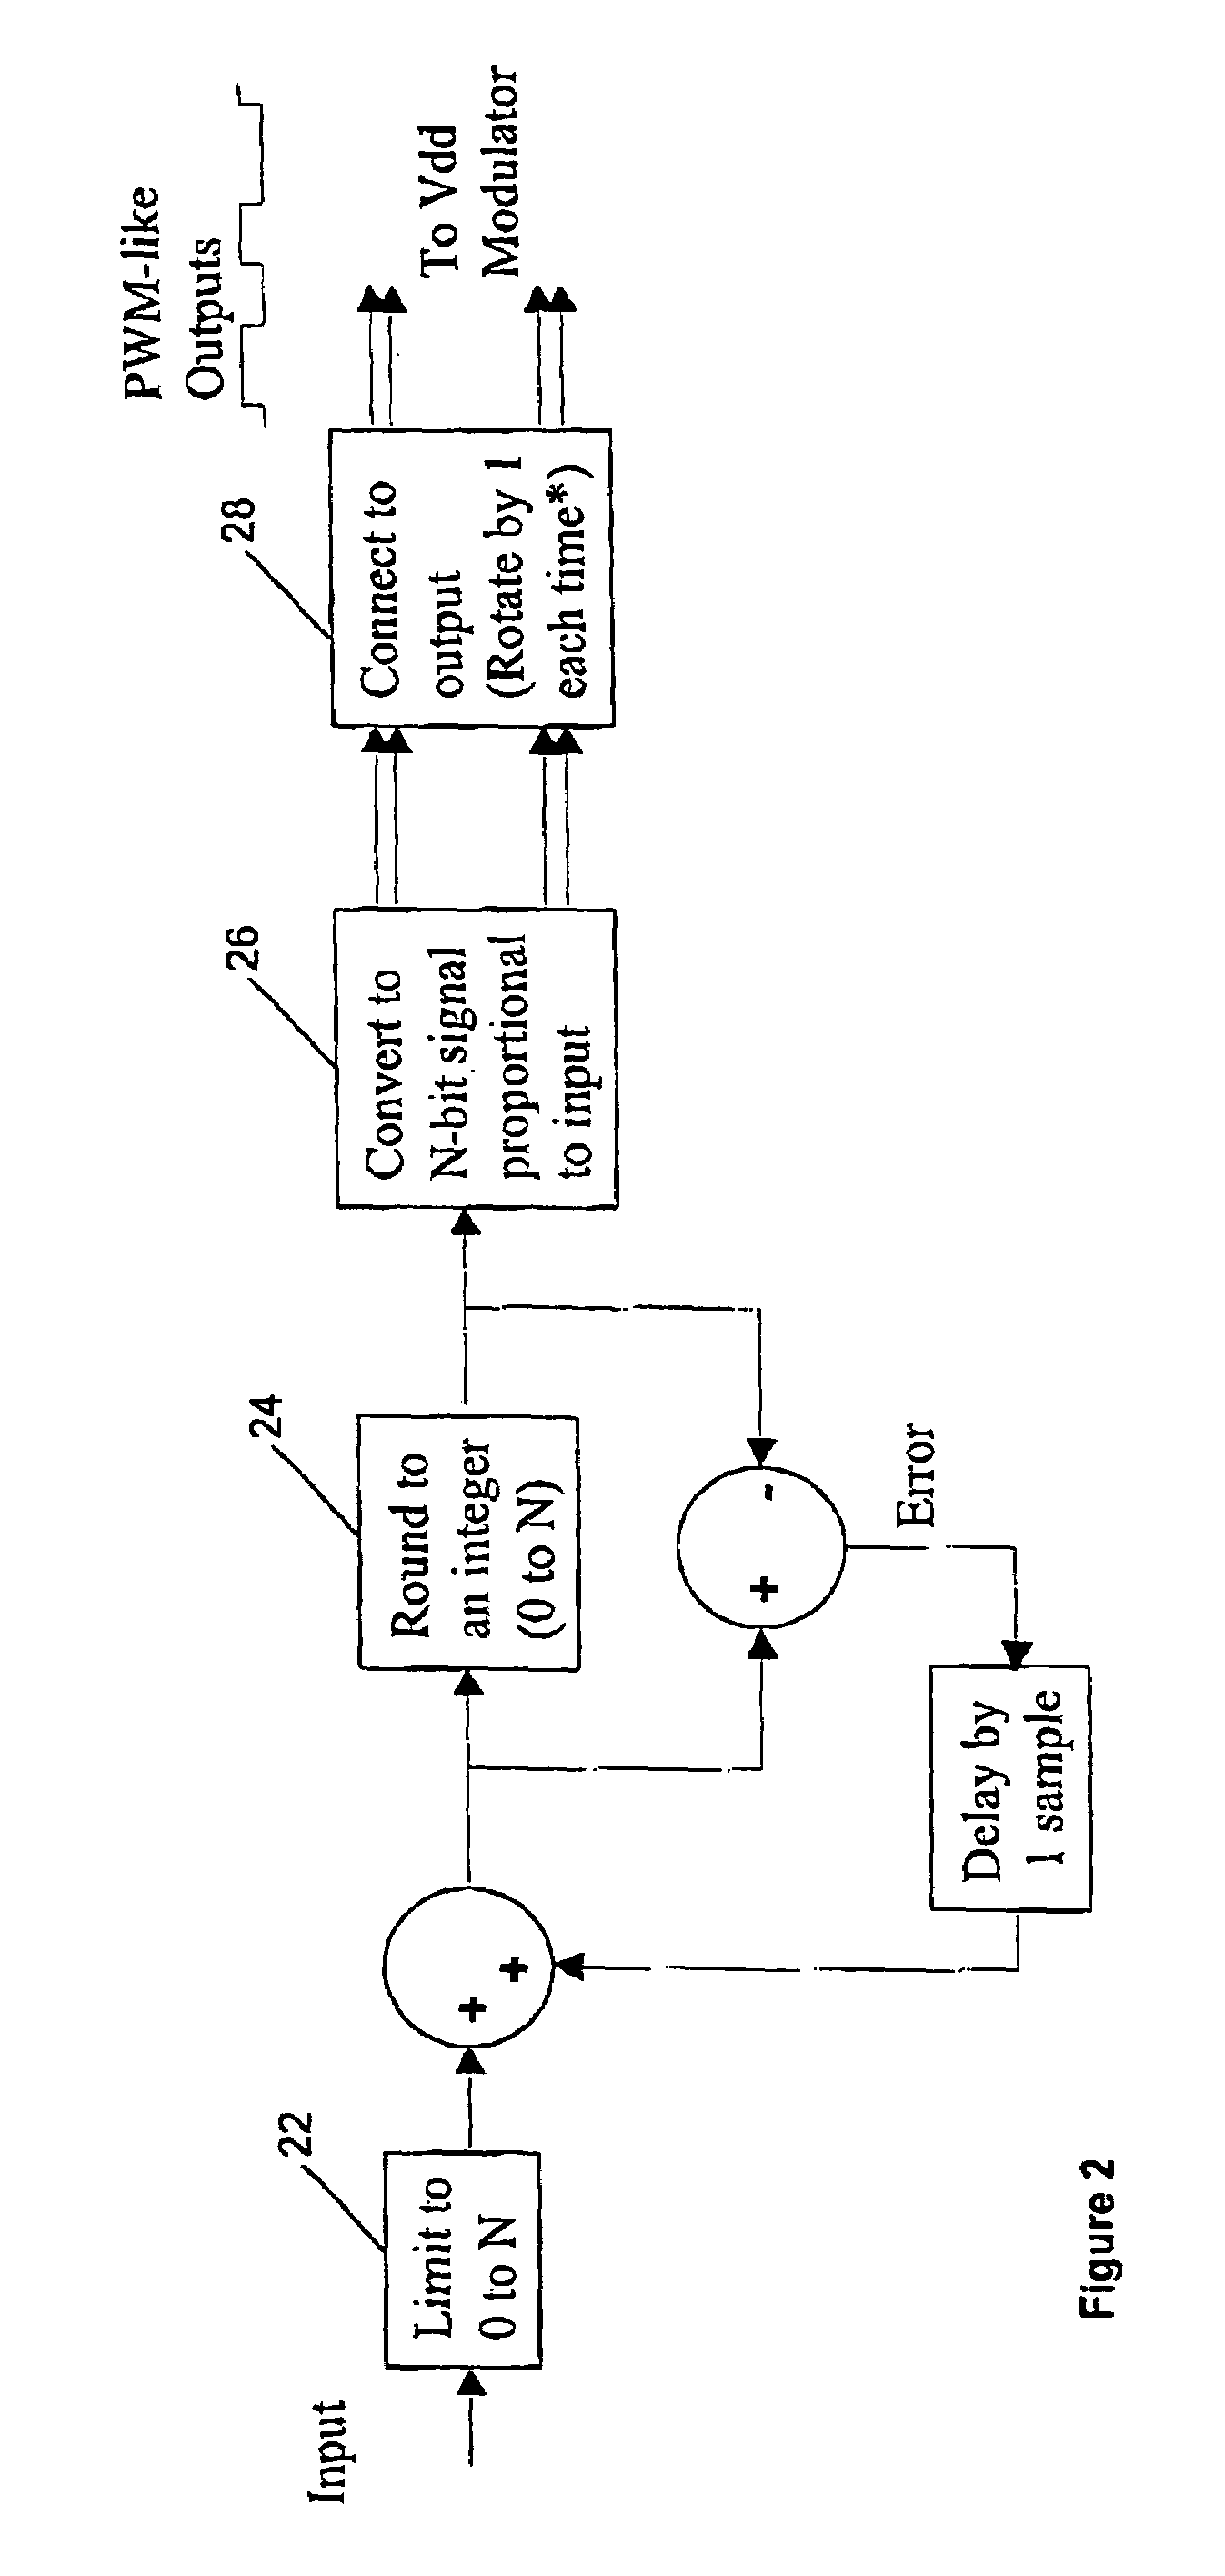 Methods and apparatus for controlling the output voltage of a switched-mode power supply